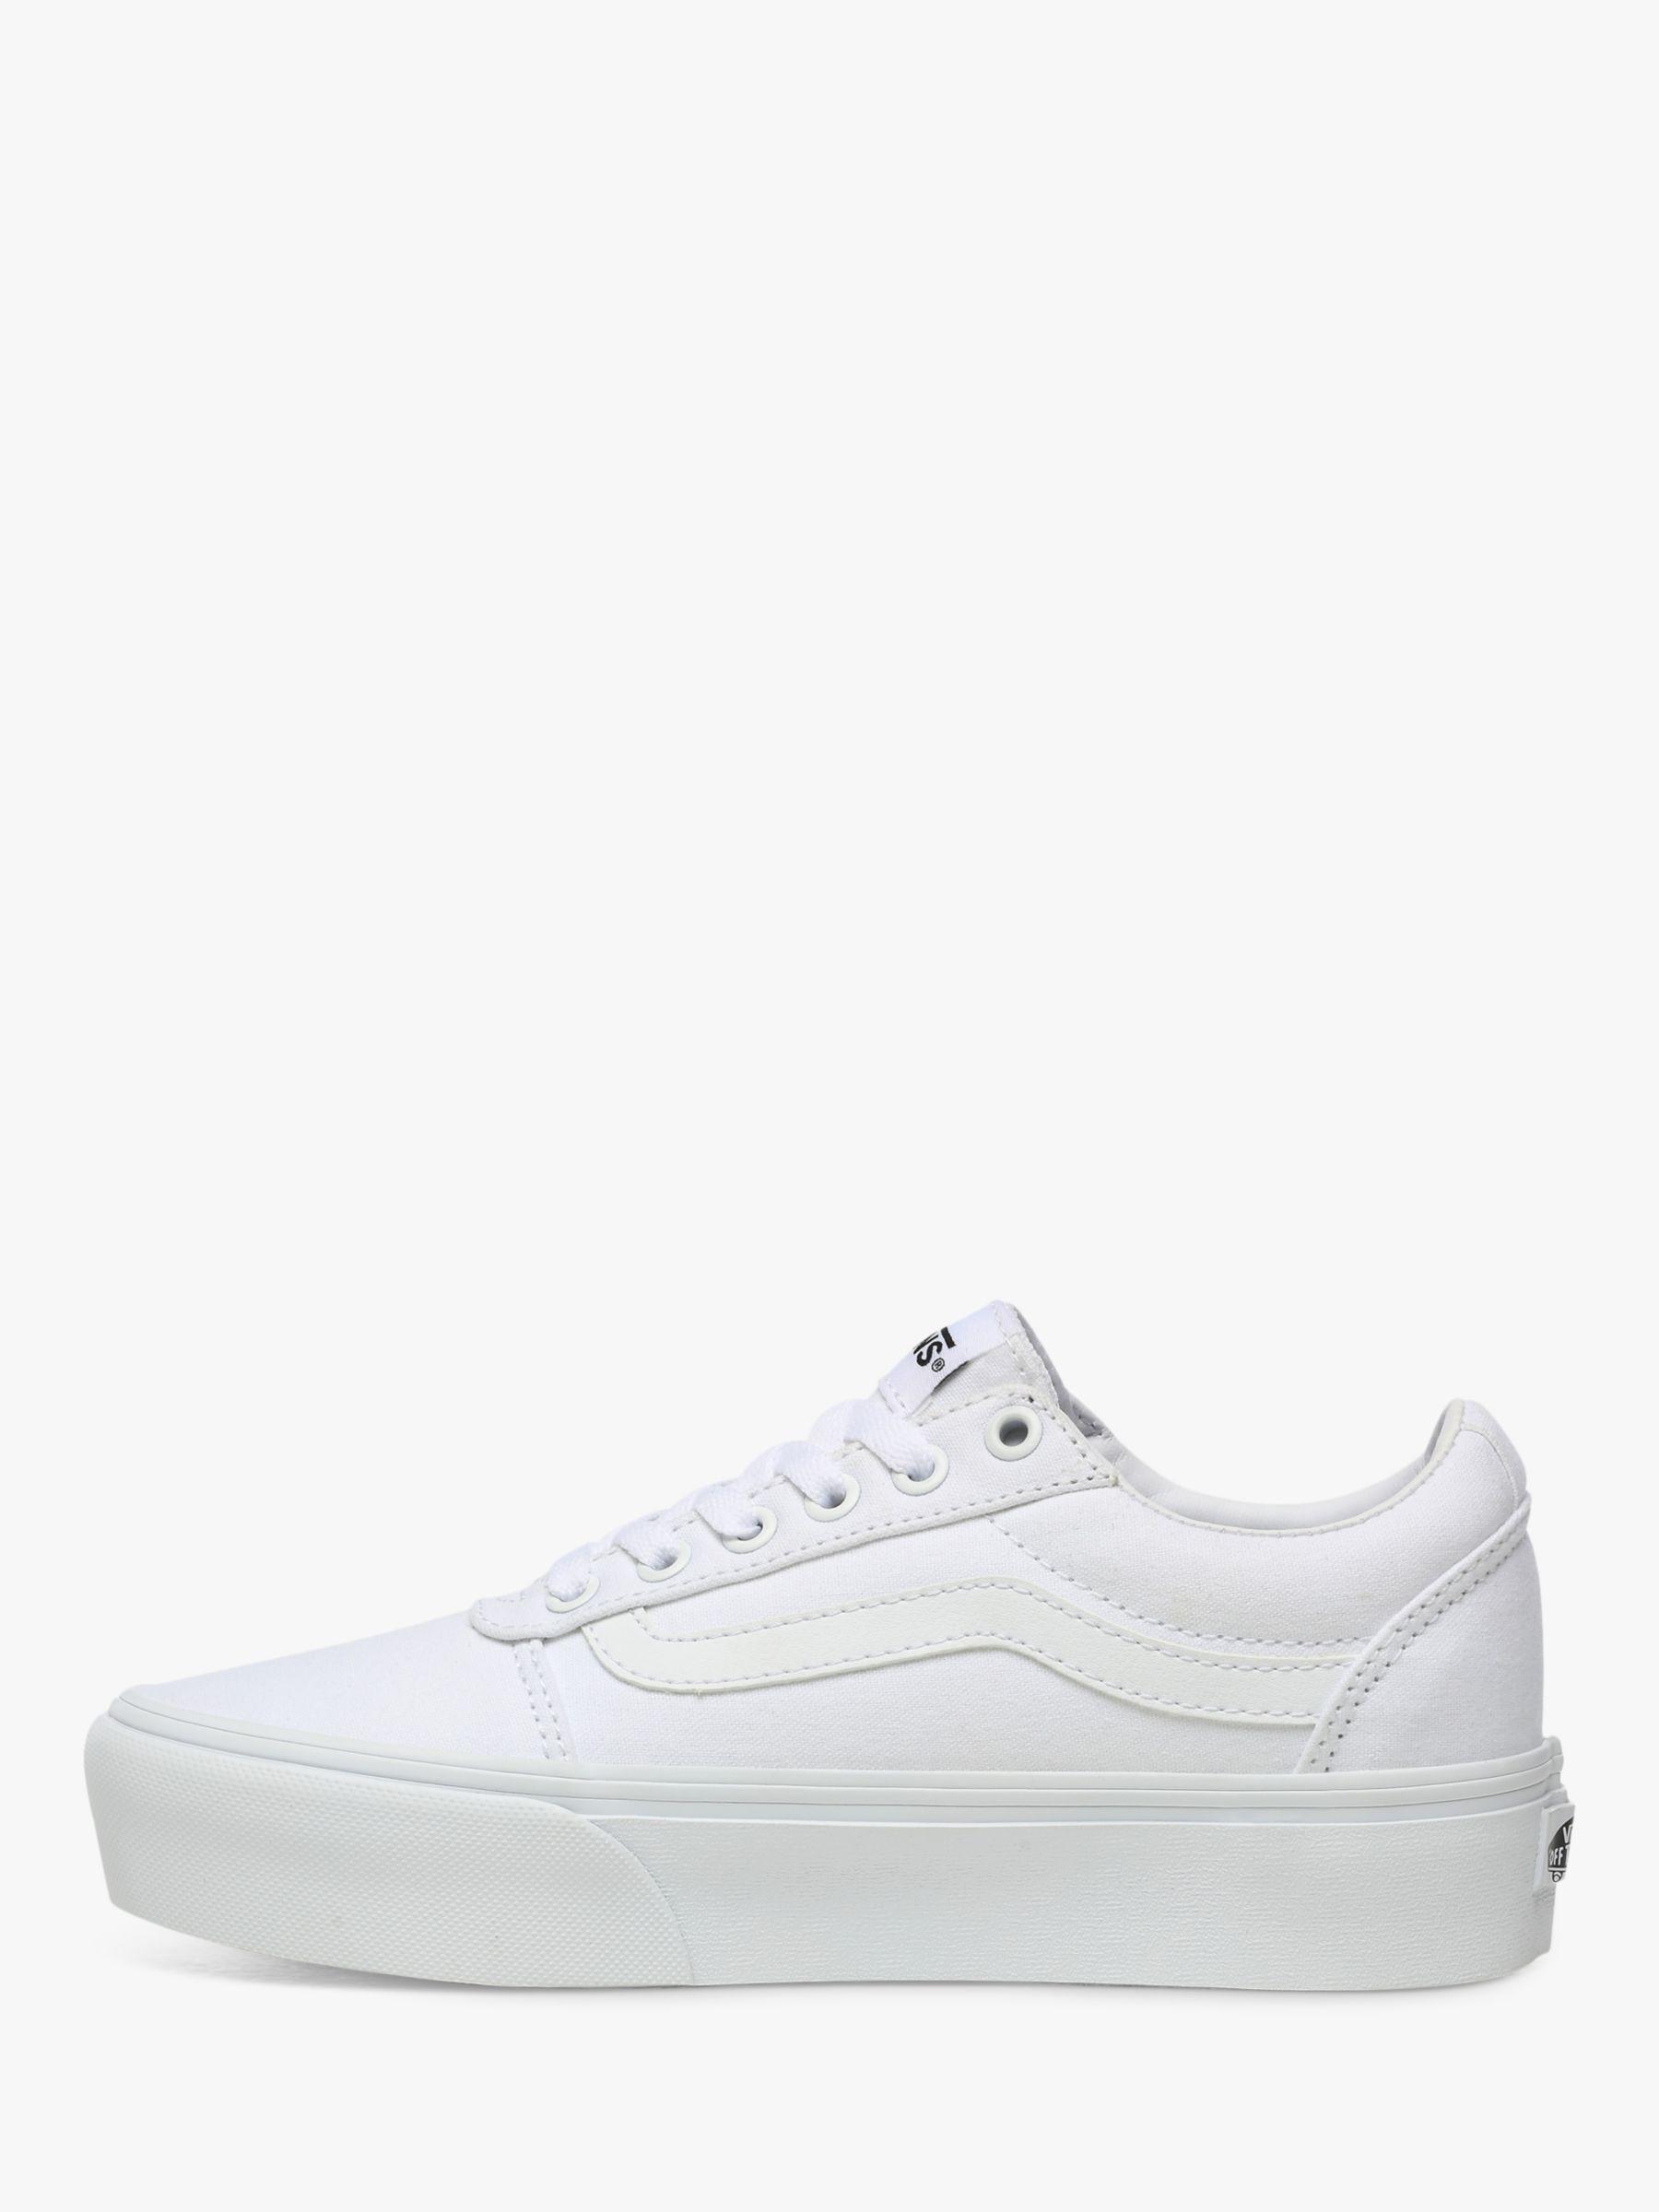 vans ward lace up trainers